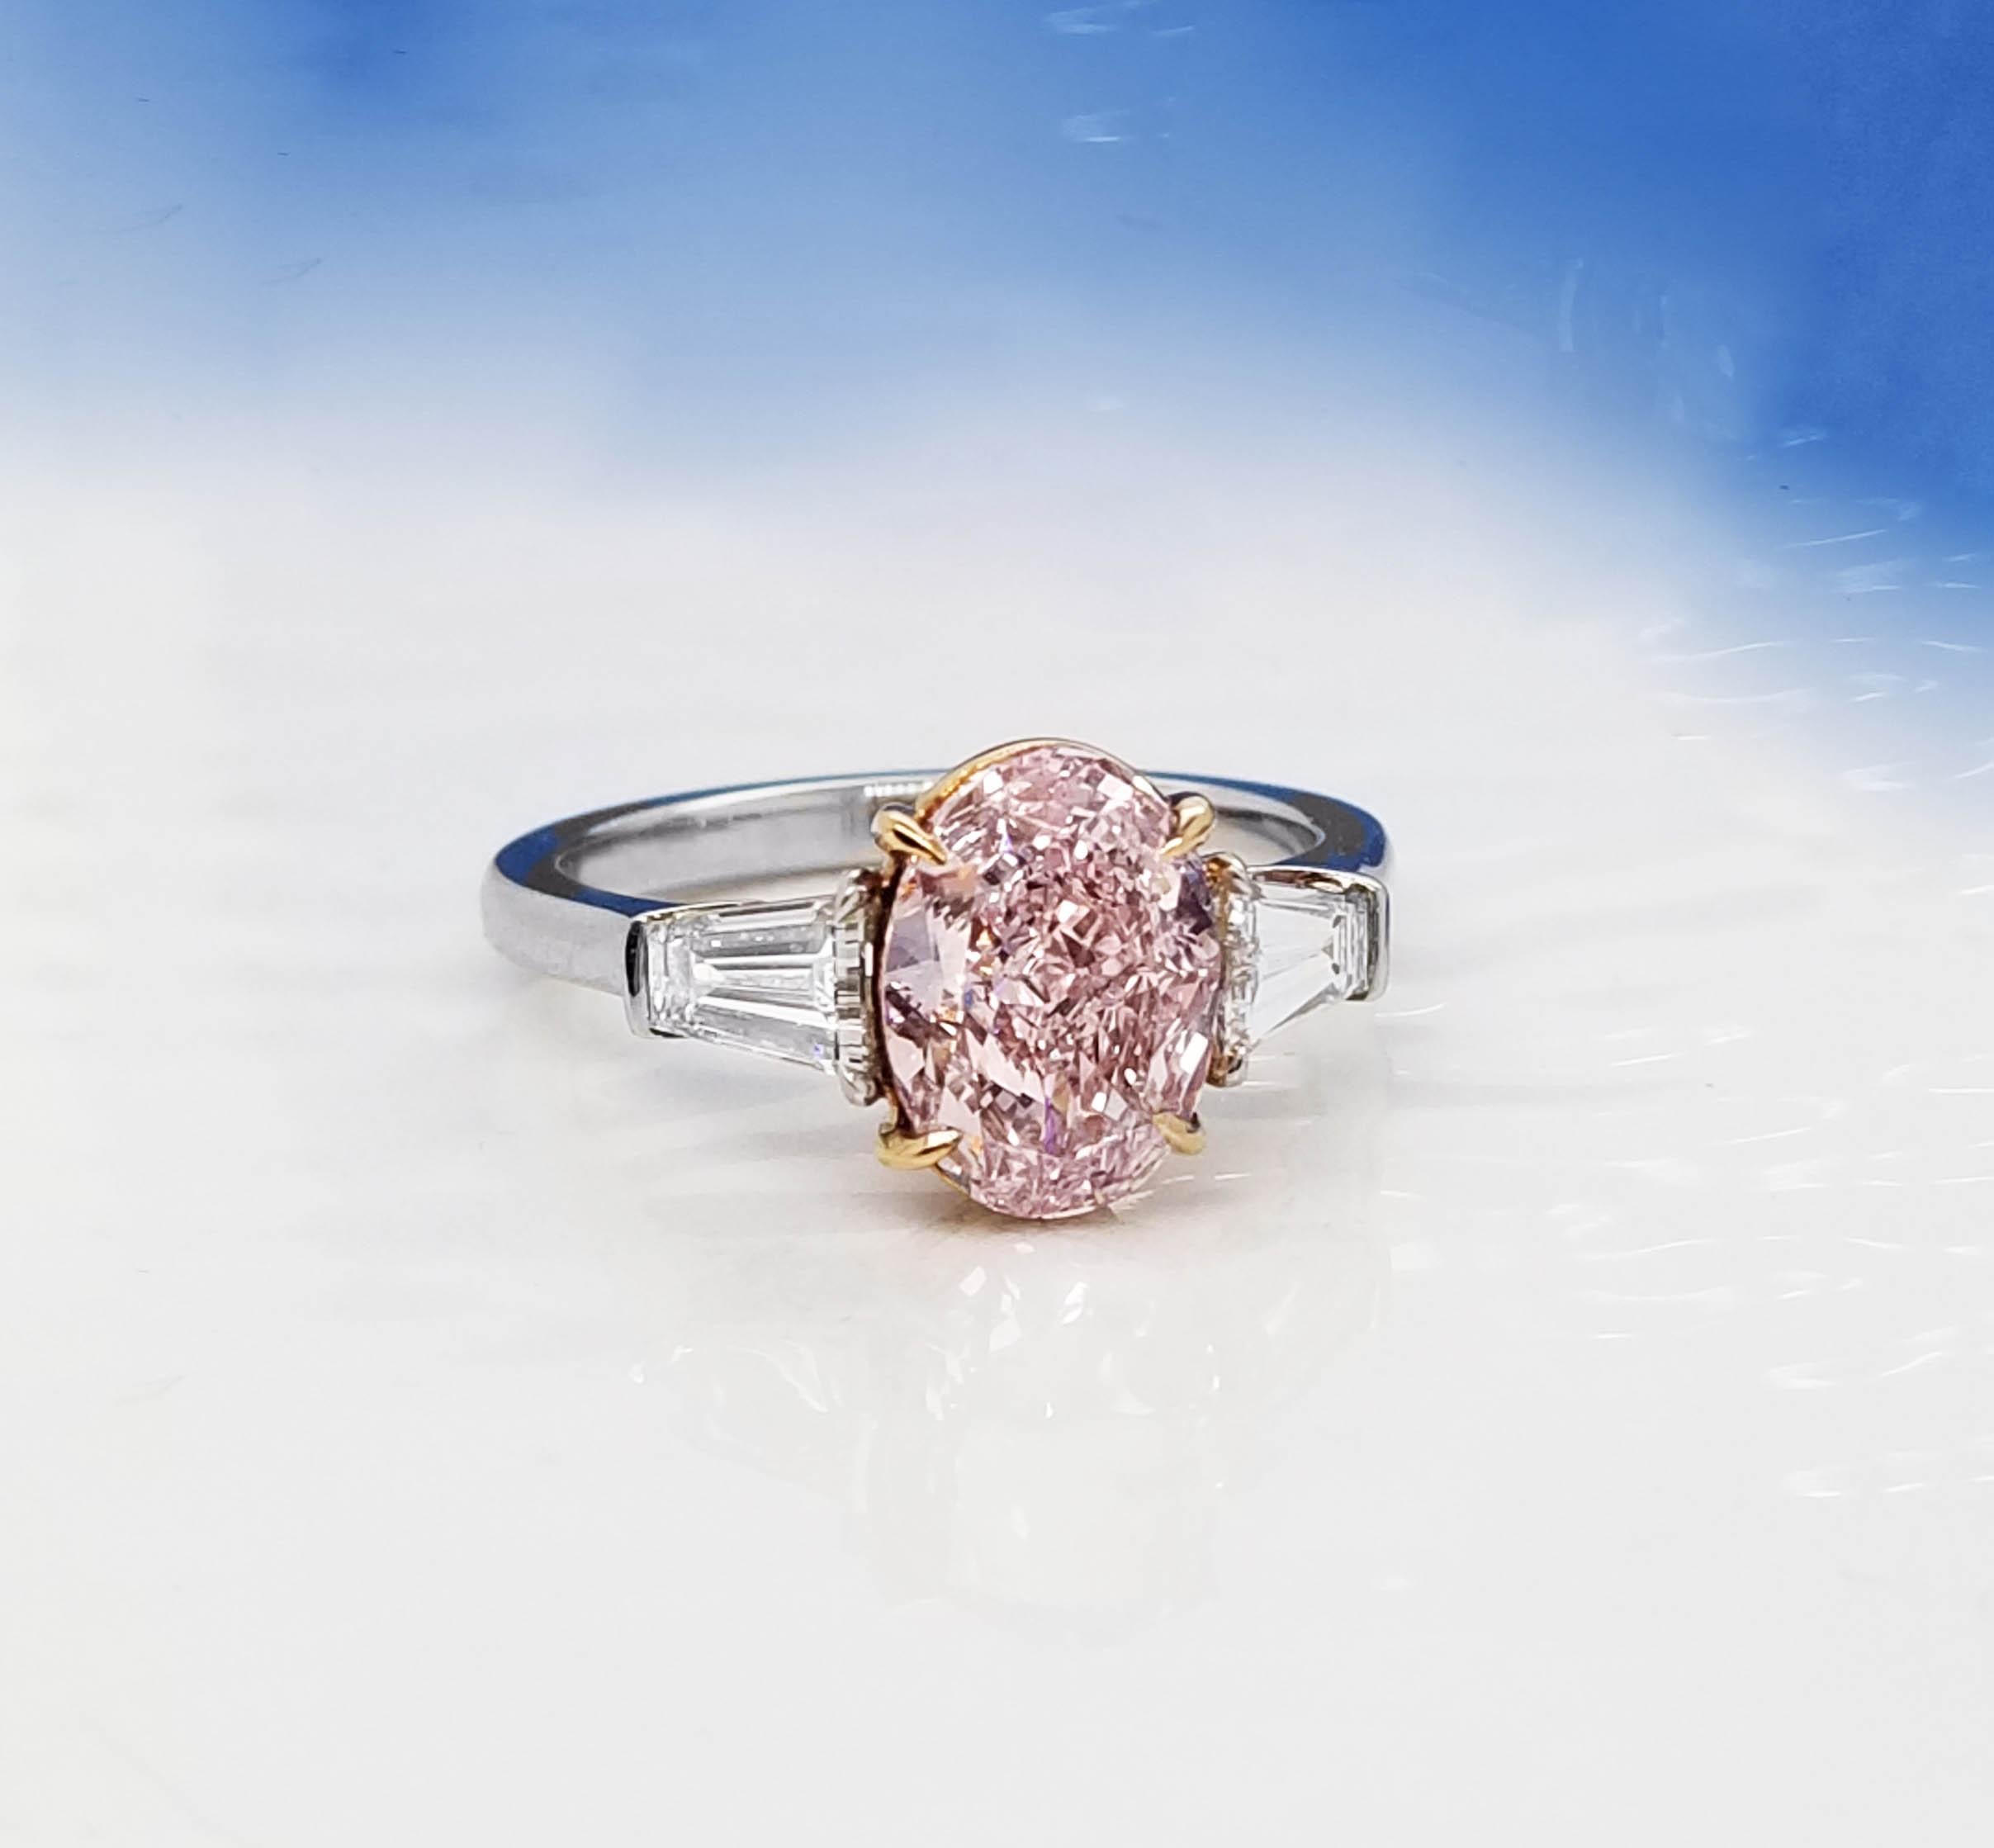 From SCARSELLI, a world-renowned fancy color diamond house, this rare 2+ Fancy Purple-pink Oval diamond is VVS1 clarity and is flanked with side white diamond baguettes in Platinum for a classic look anyone would love (see certificate information